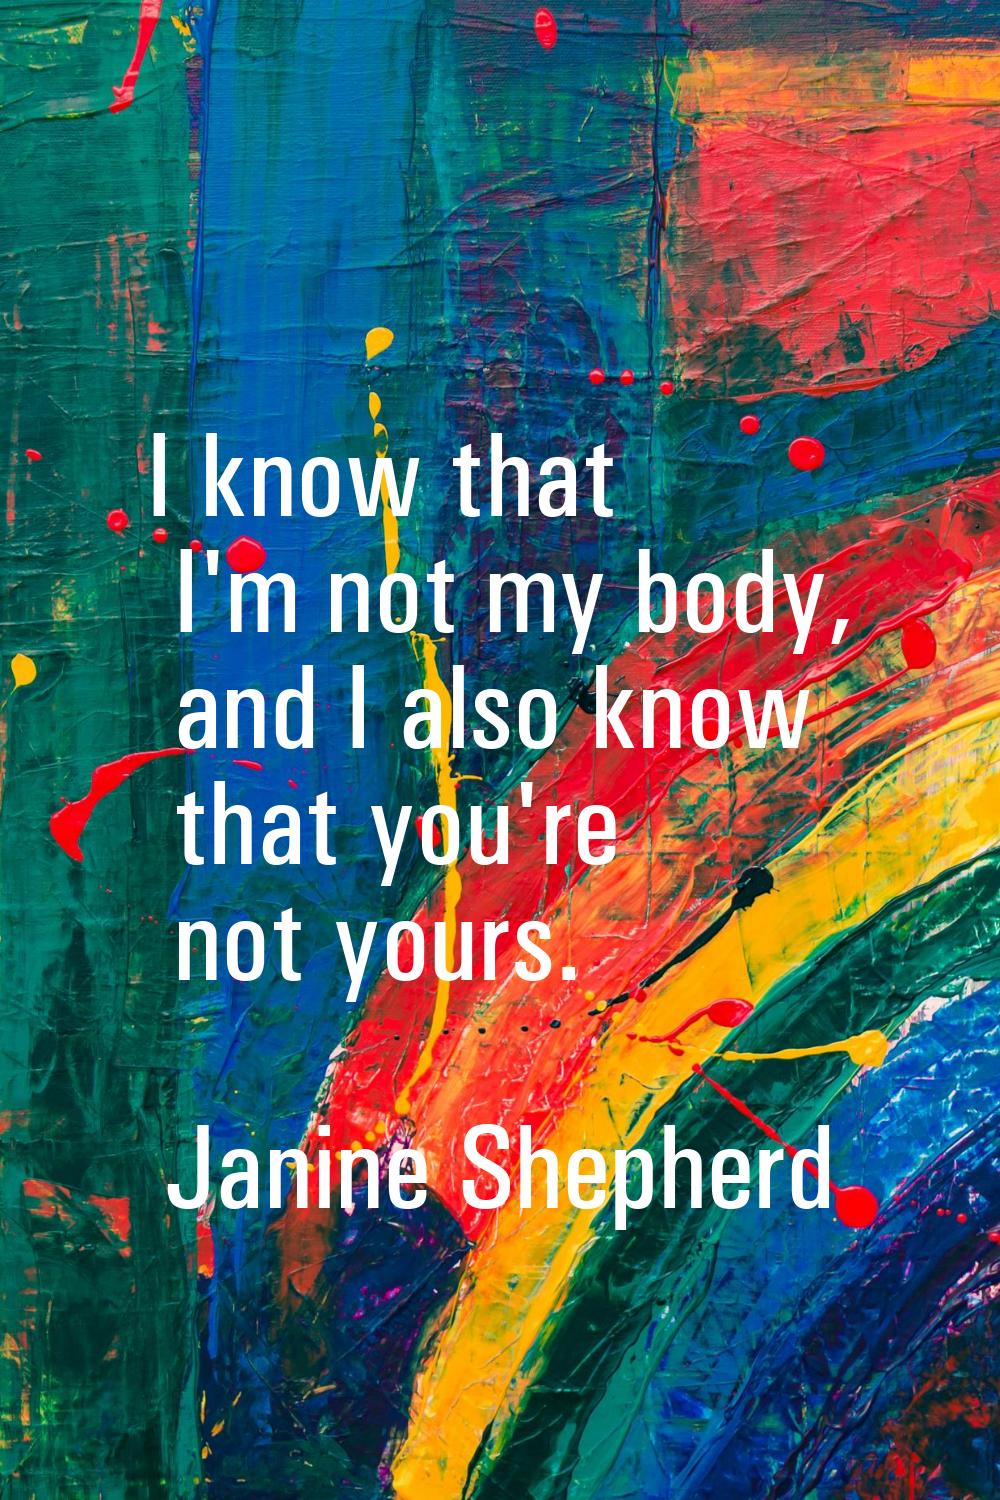 I know that I'm not my body, and I also know that you're not yours.